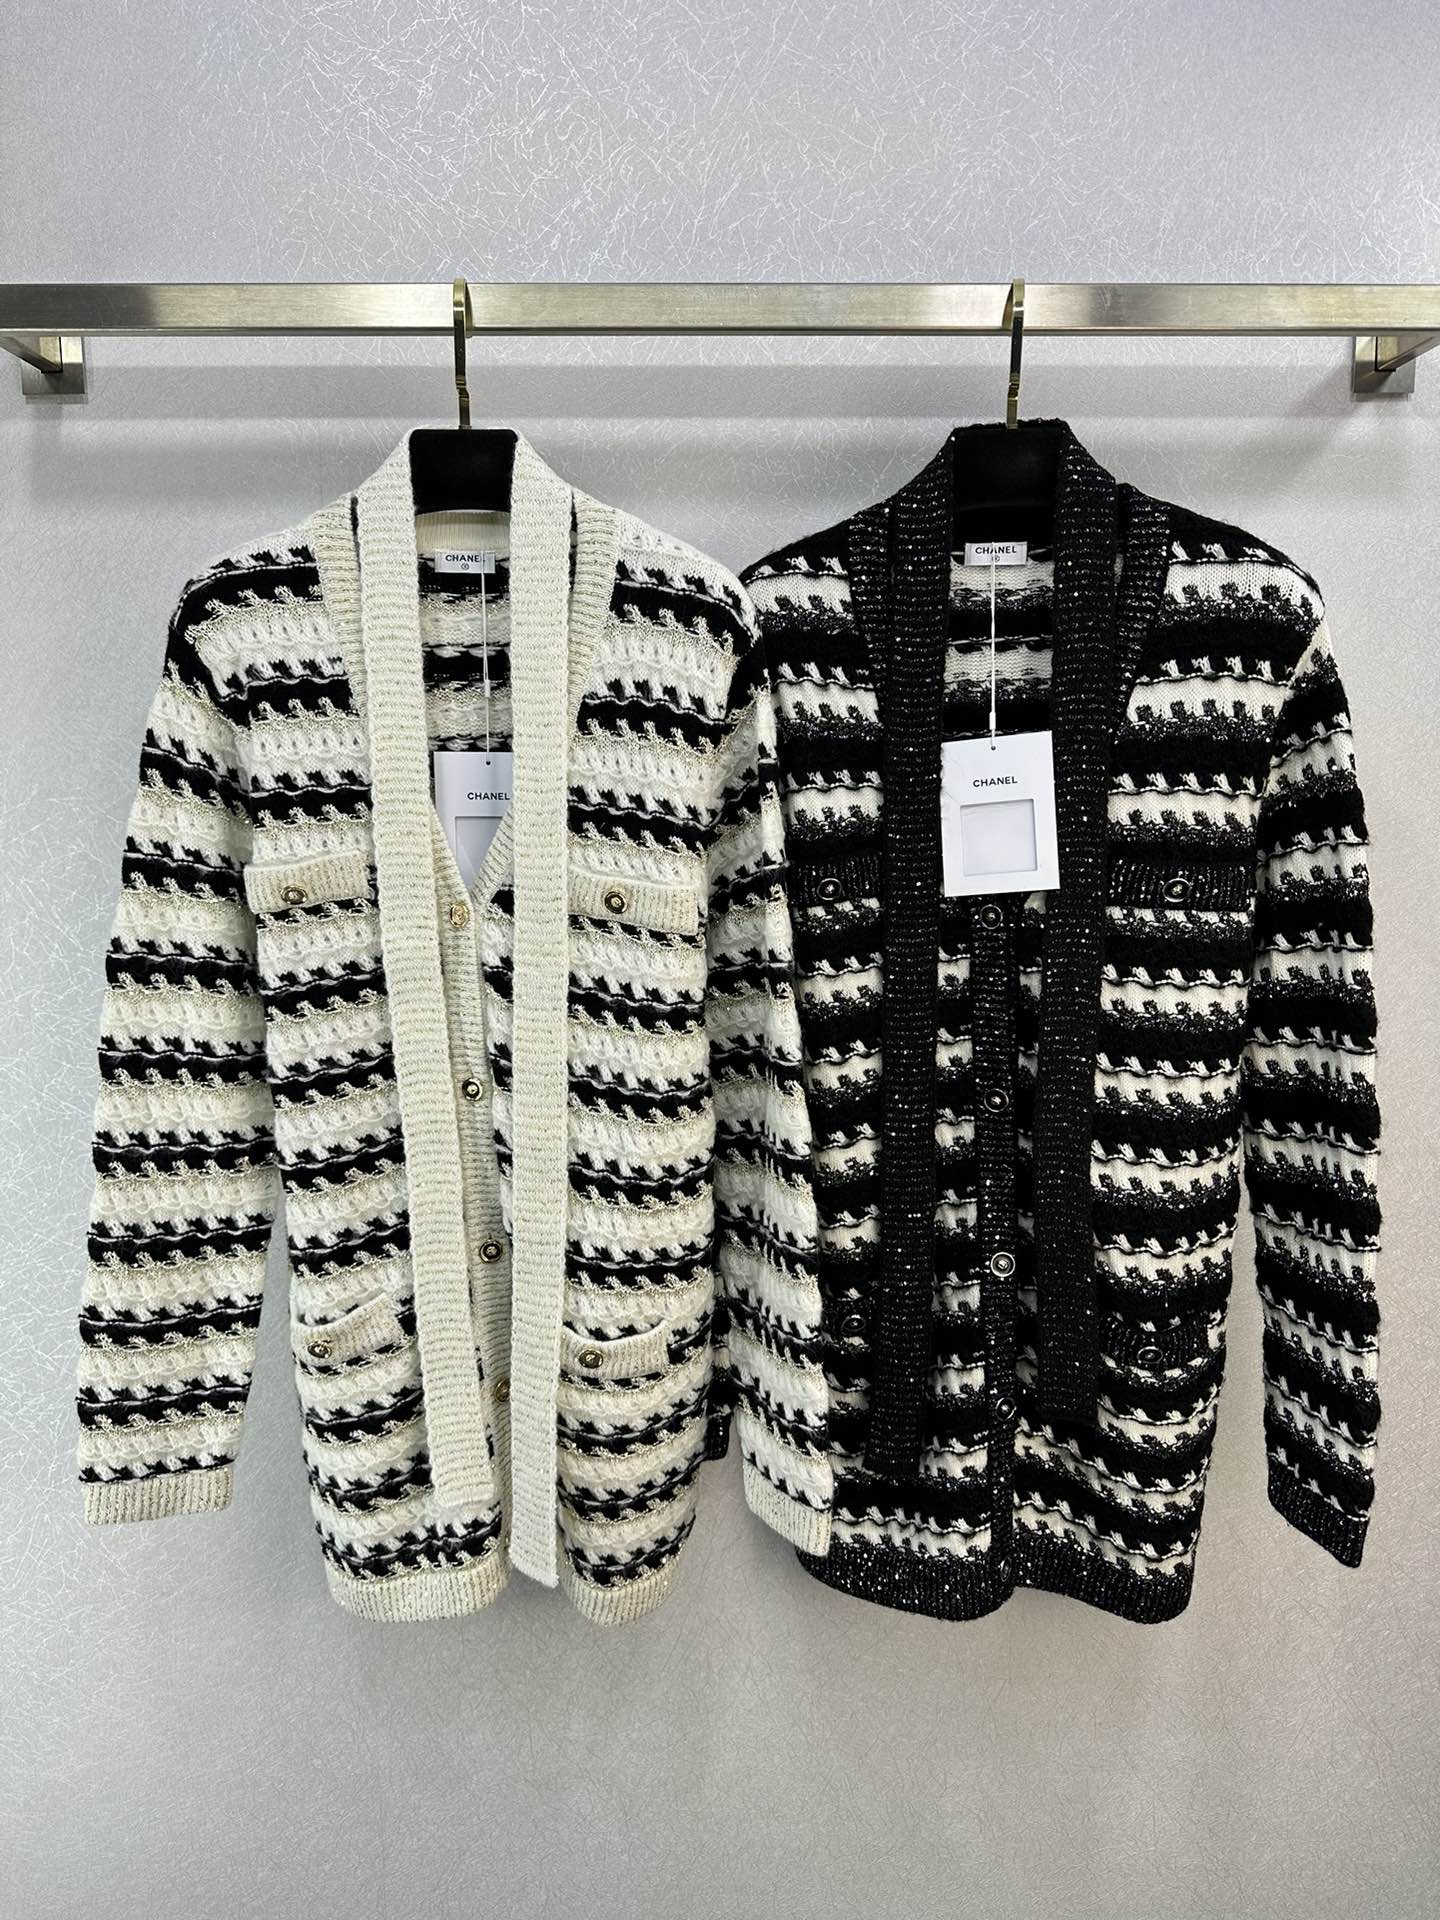 Chanel Clothing Cardigans 7 Star Quality Designer Replica
 White Fall/Winter Collection Vintage